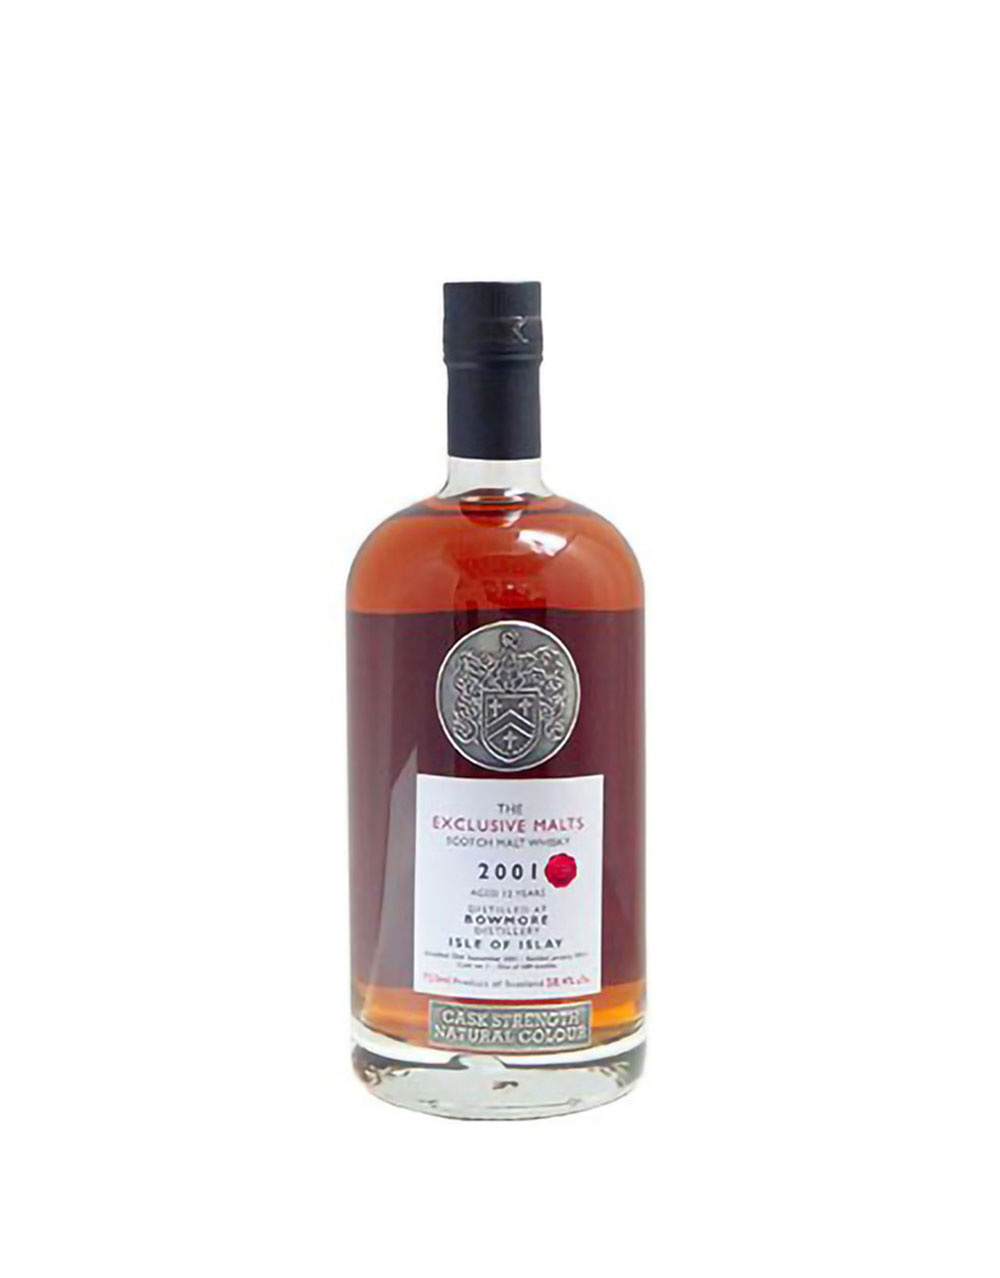 Exclusive Malts Bowmore 12 Year Old Cask Strength Single Malt Scotch Whisky